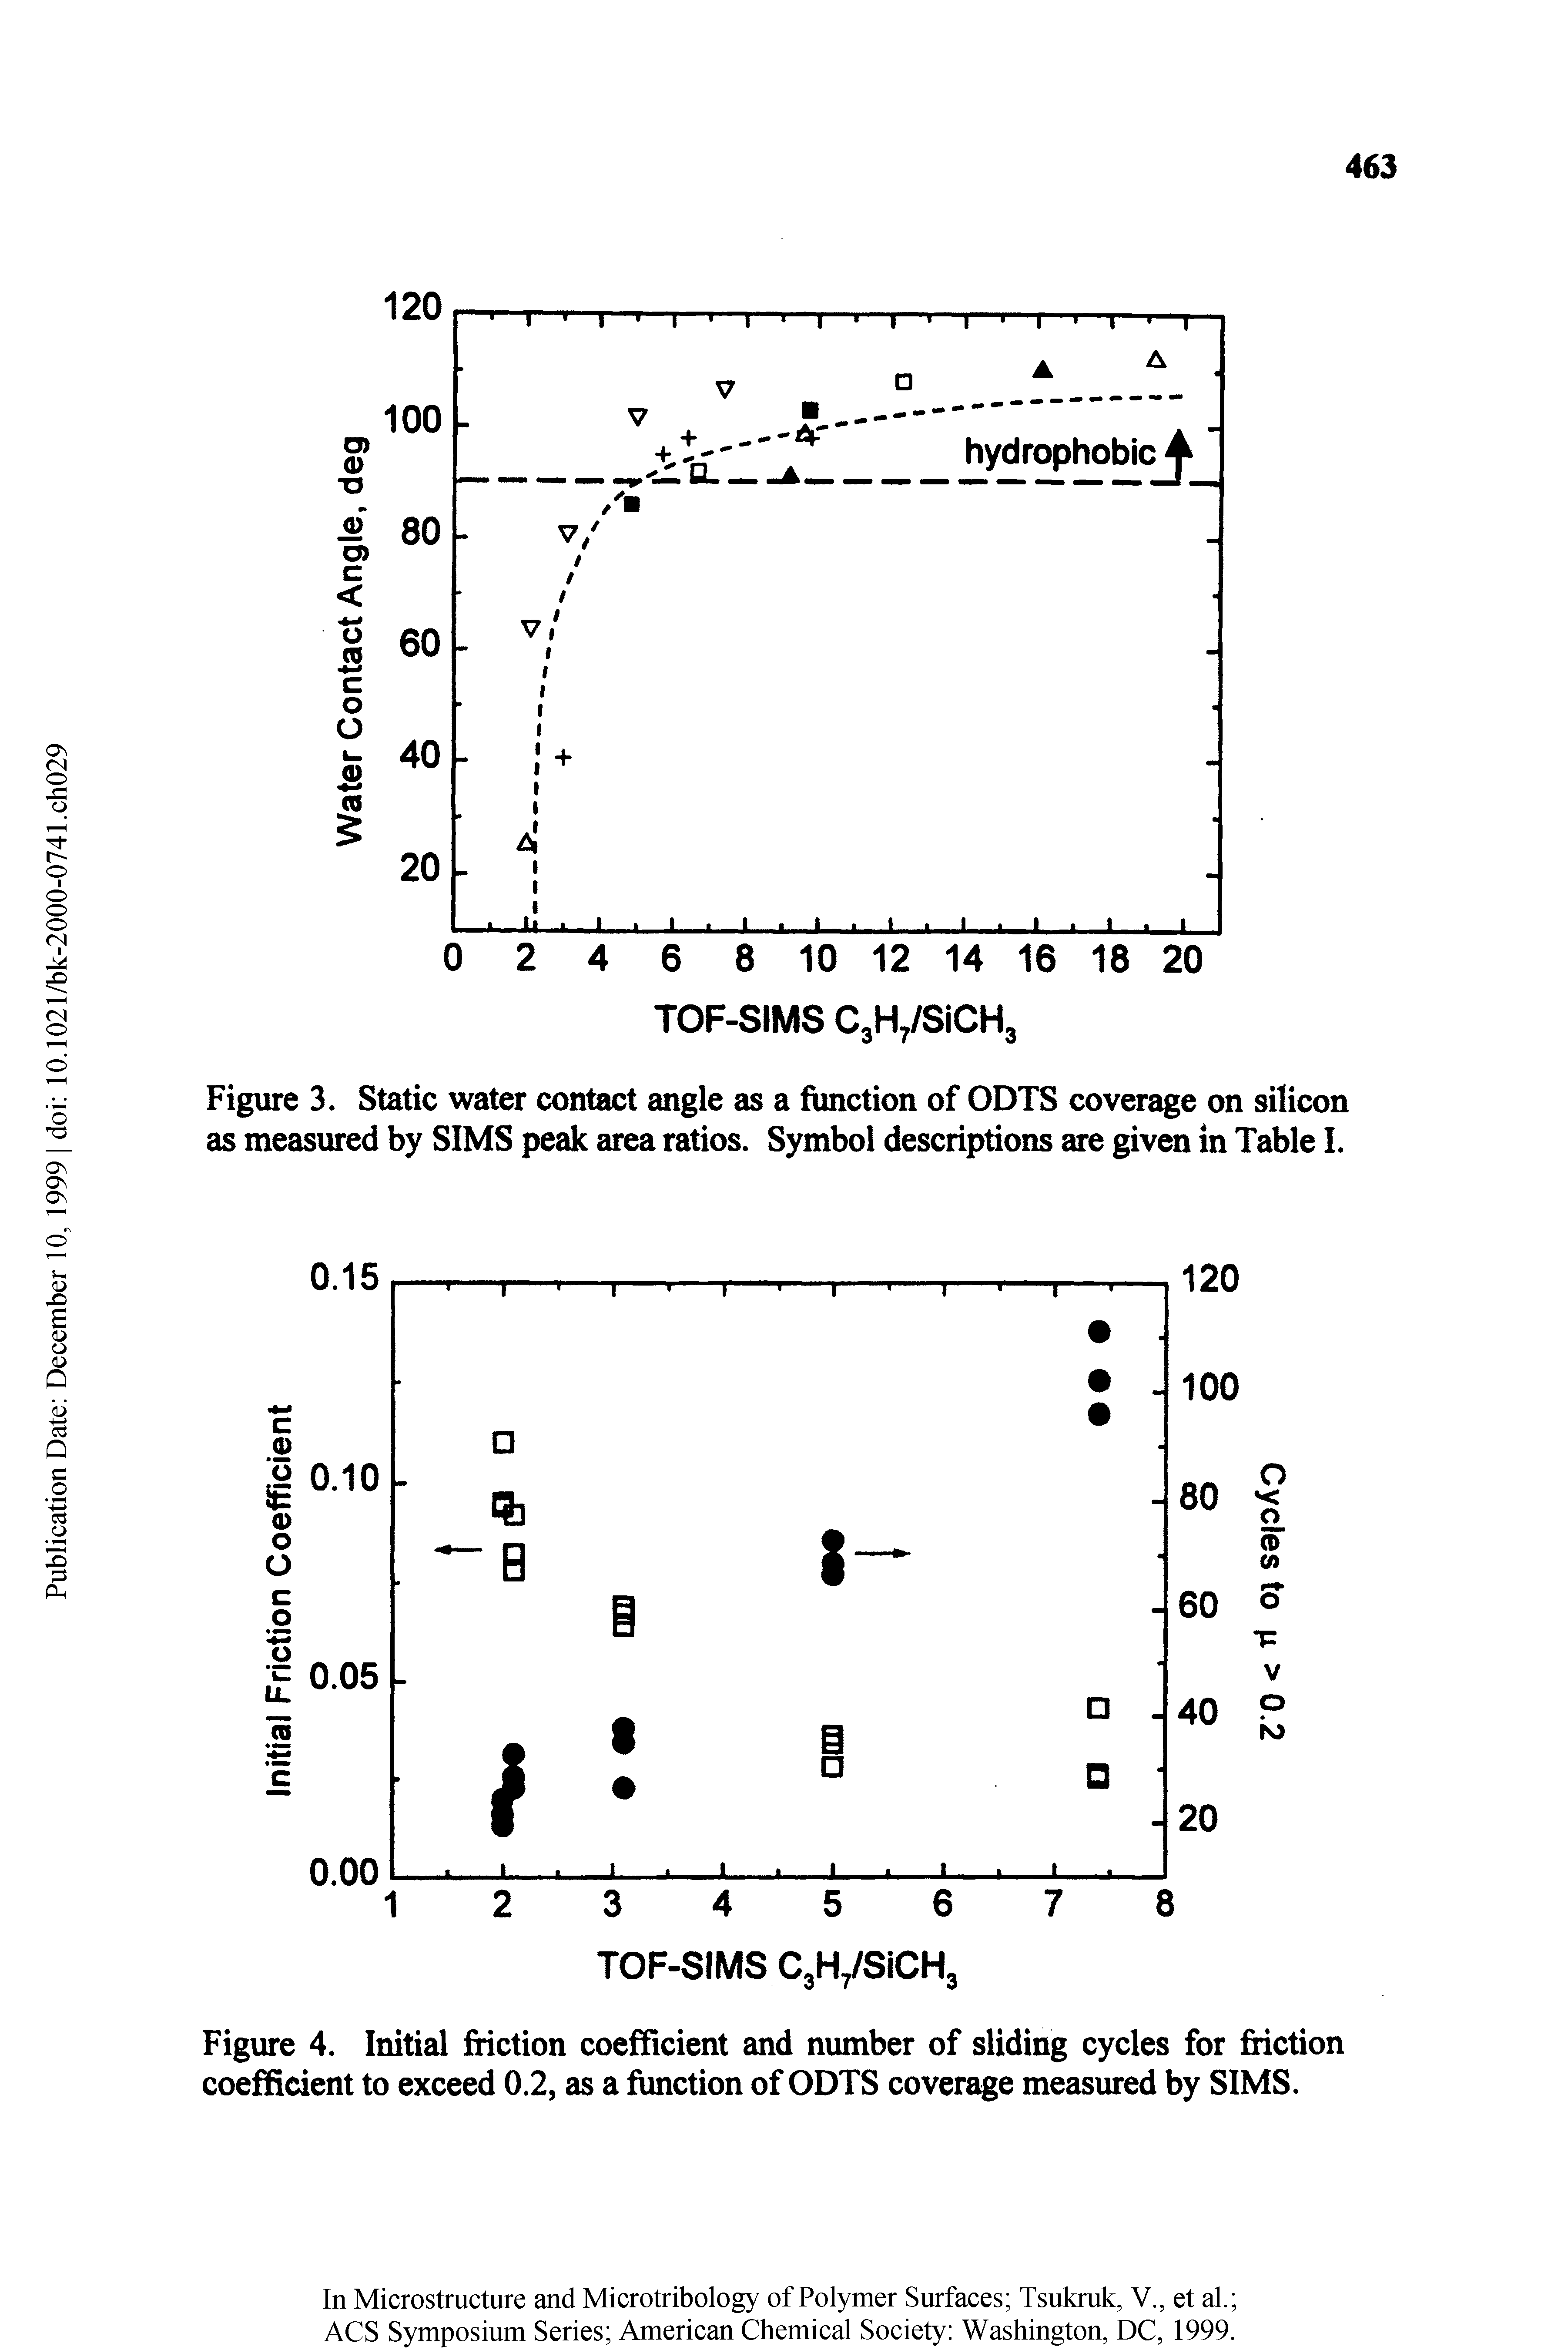 Figure 3. Static water contact angle as a function of ODTS coverage on silicon as measured by SIMS peak area ratios. Symbol descriptions are given in Table I.